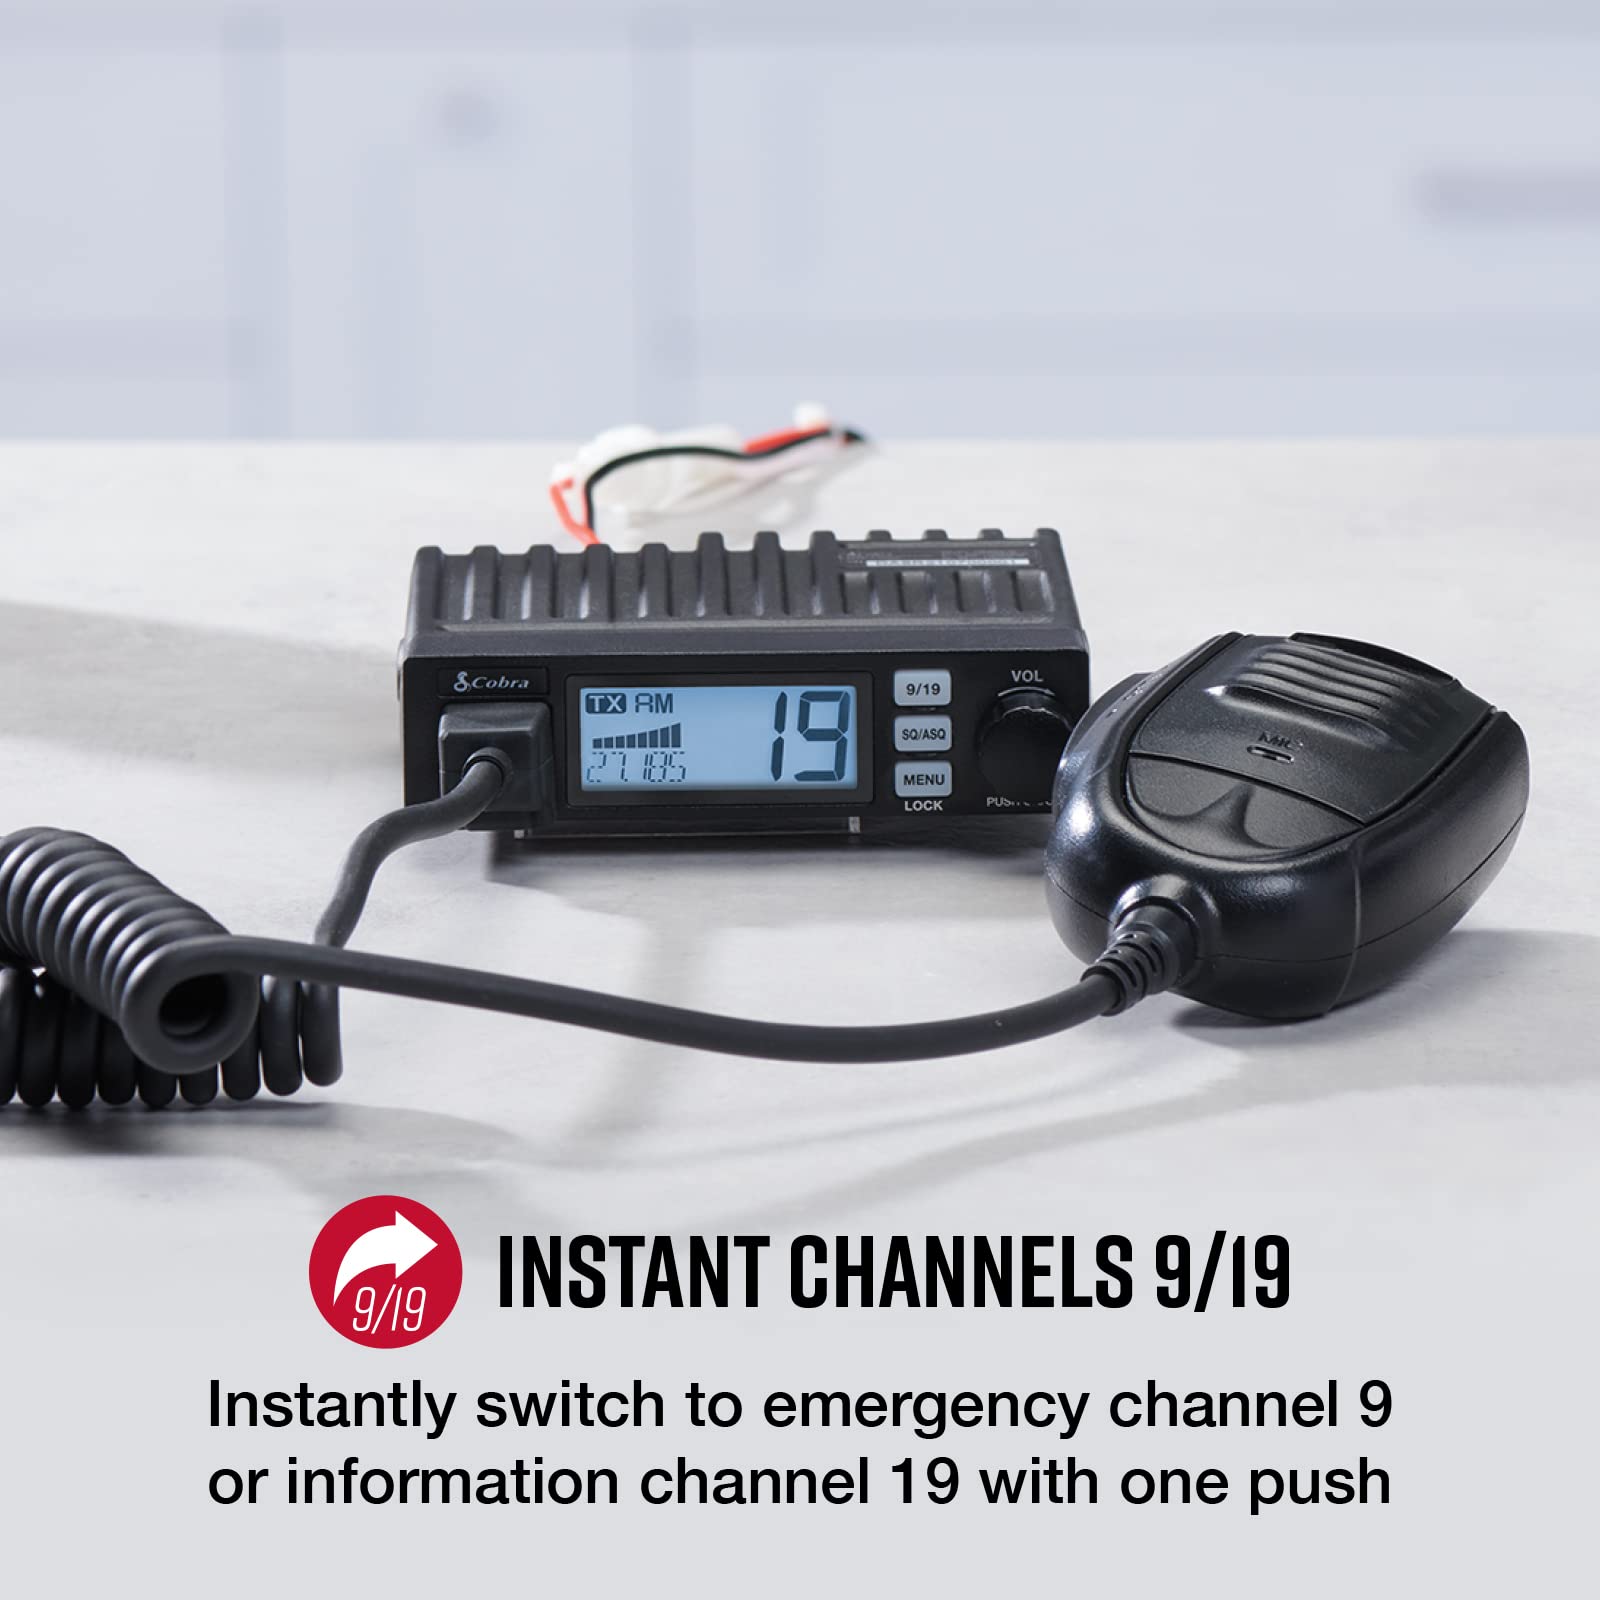 Cobra 19 MINI Recreational CB Radio - 40 Channels, Travel Essentials, Time Out Timer, VOX, Auto Squelch, Auto Power, Instant Channel 9/19, 4-Watt Output, Easy to Operate, Black